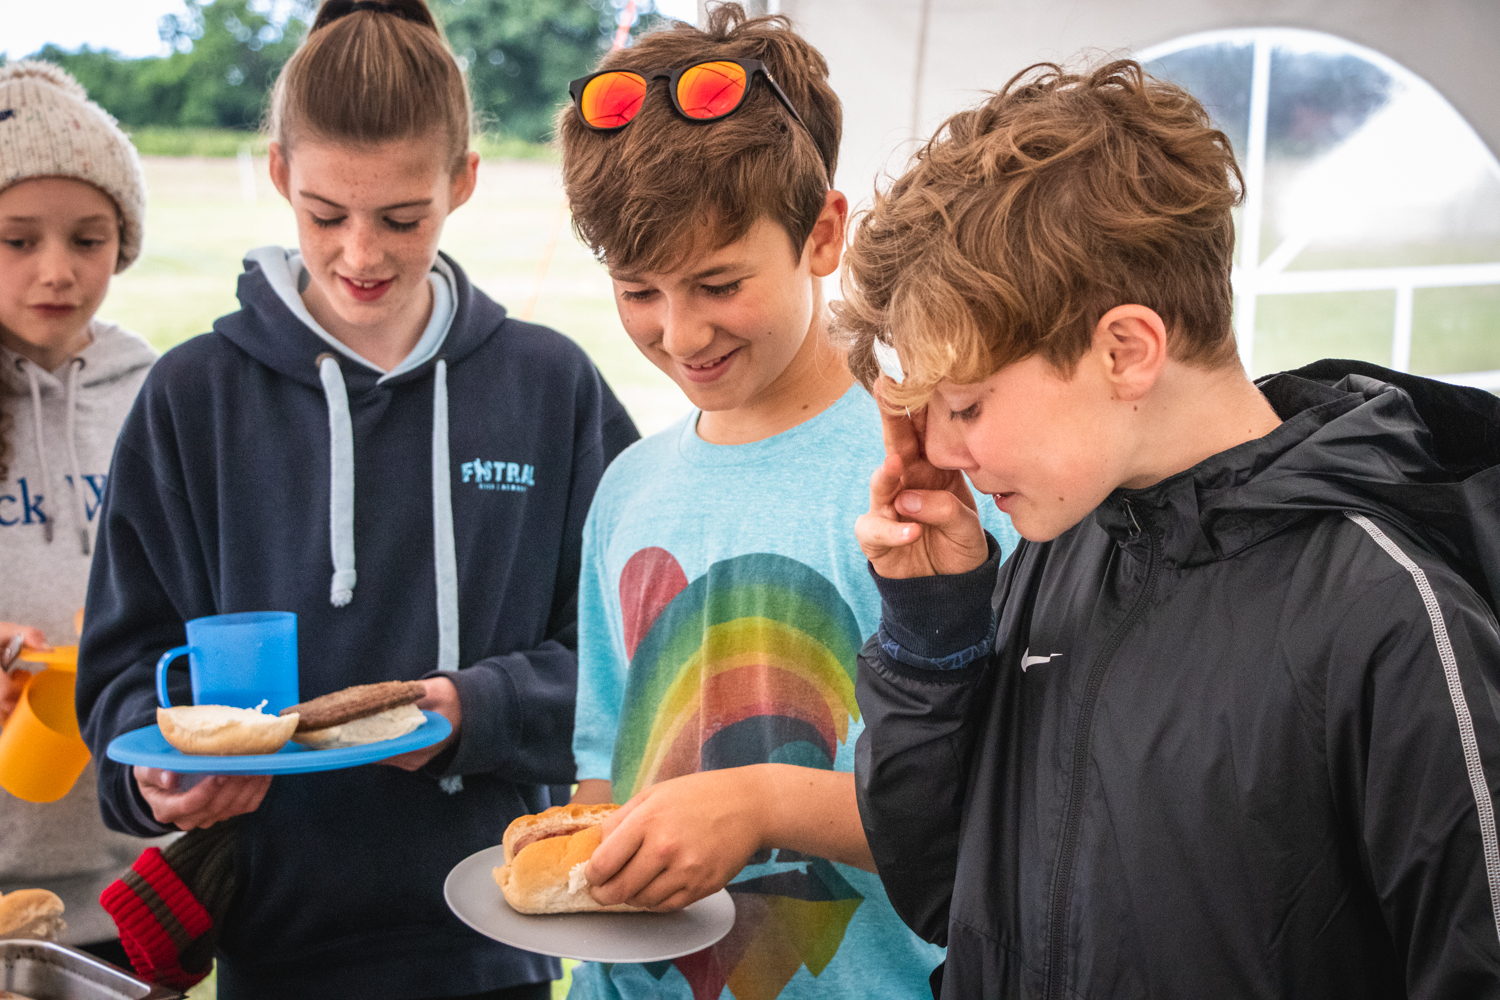 Students enjoying hearty food during a school residential trip